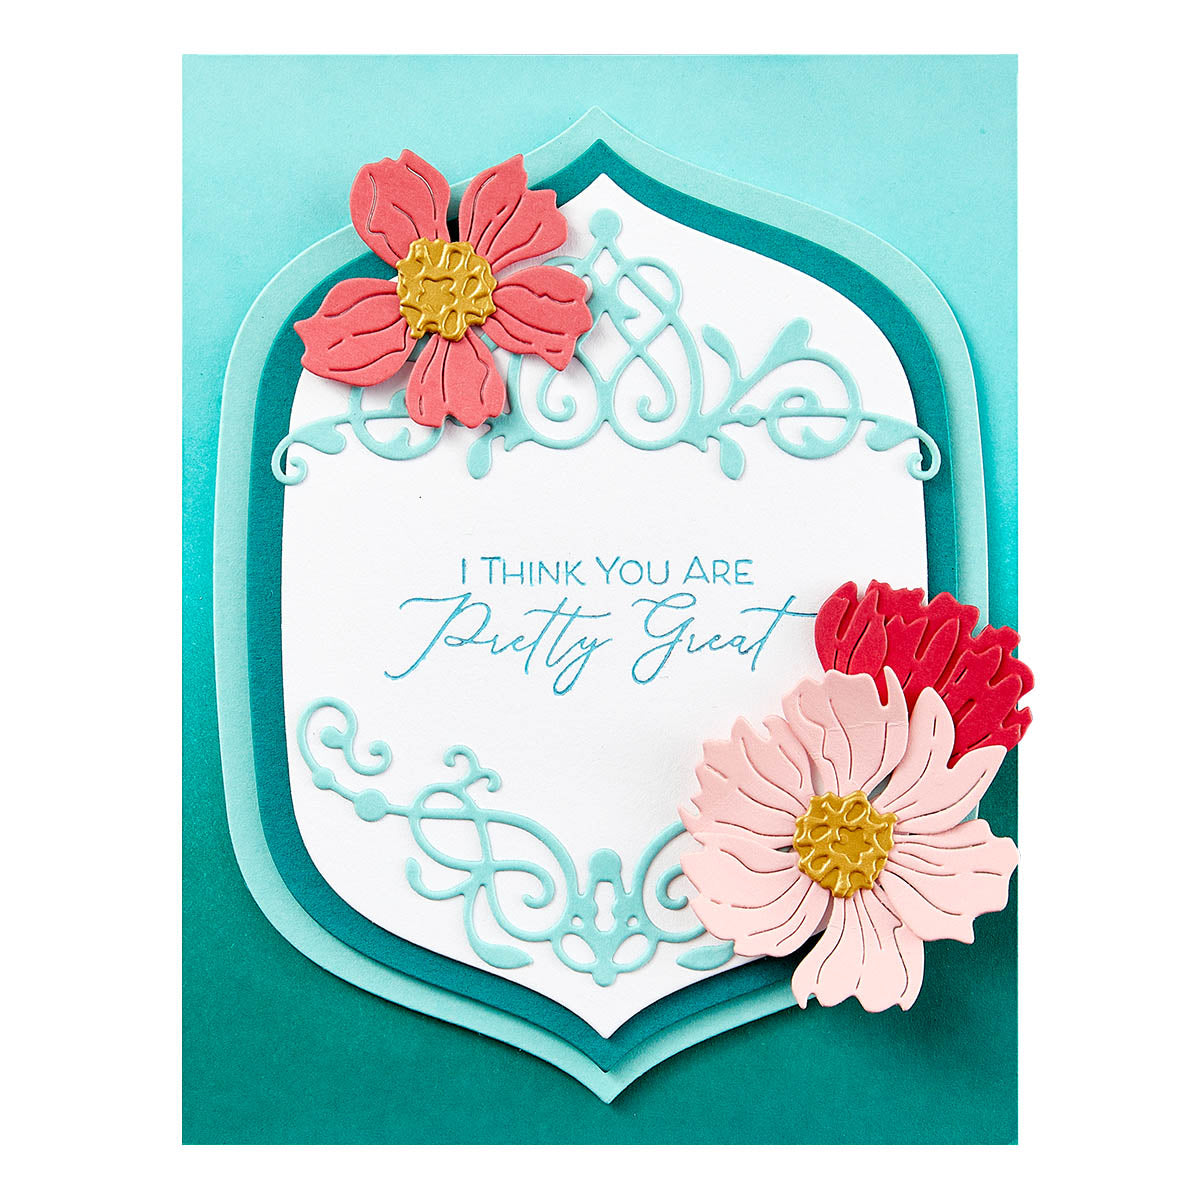 Spellbinders - New Beginnings Timeless Sentiments Press Plates from the Timeless Collection